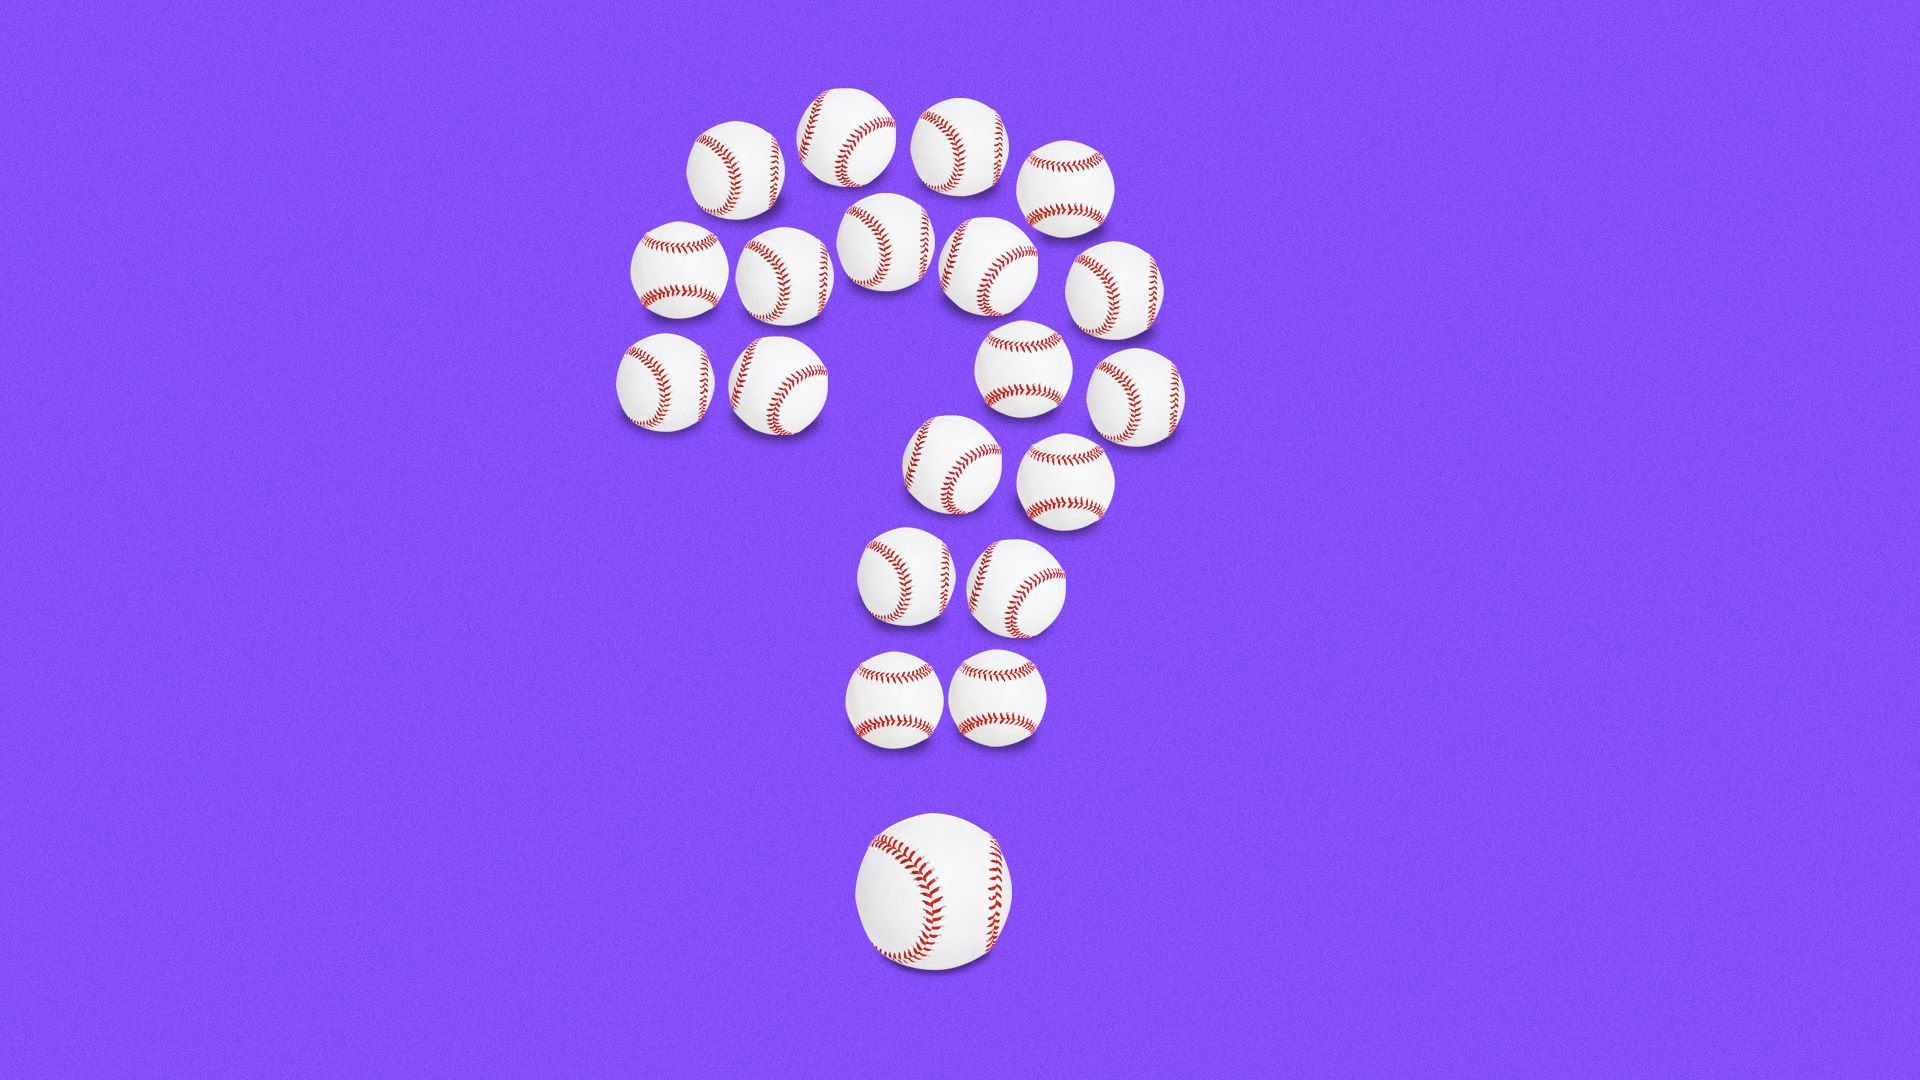 Illustration of baseballs arranged in the shape of a question mark